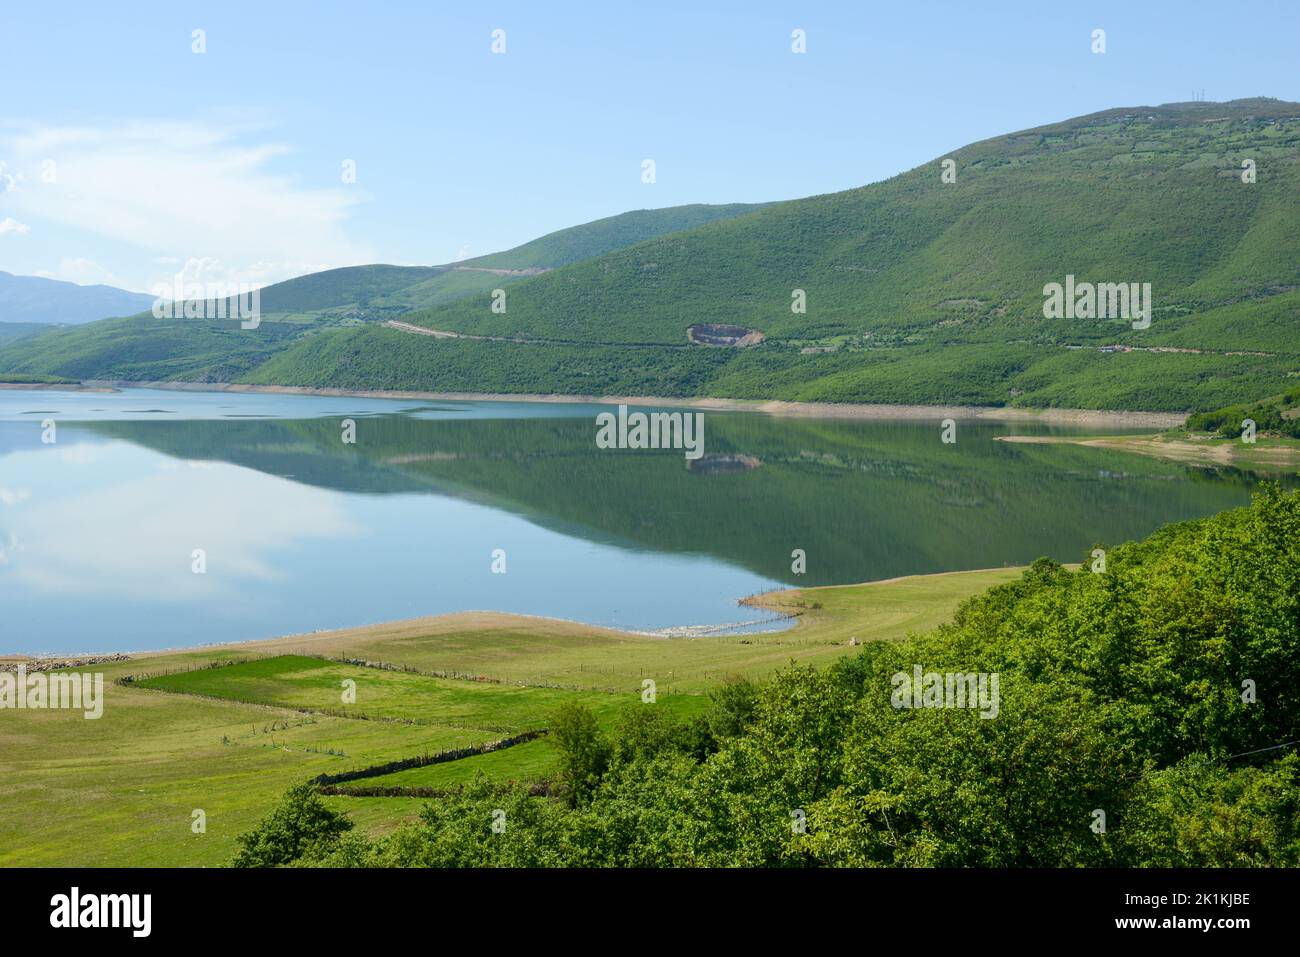 View of Fierza reservoir at Kukes on Albania Stock Photo